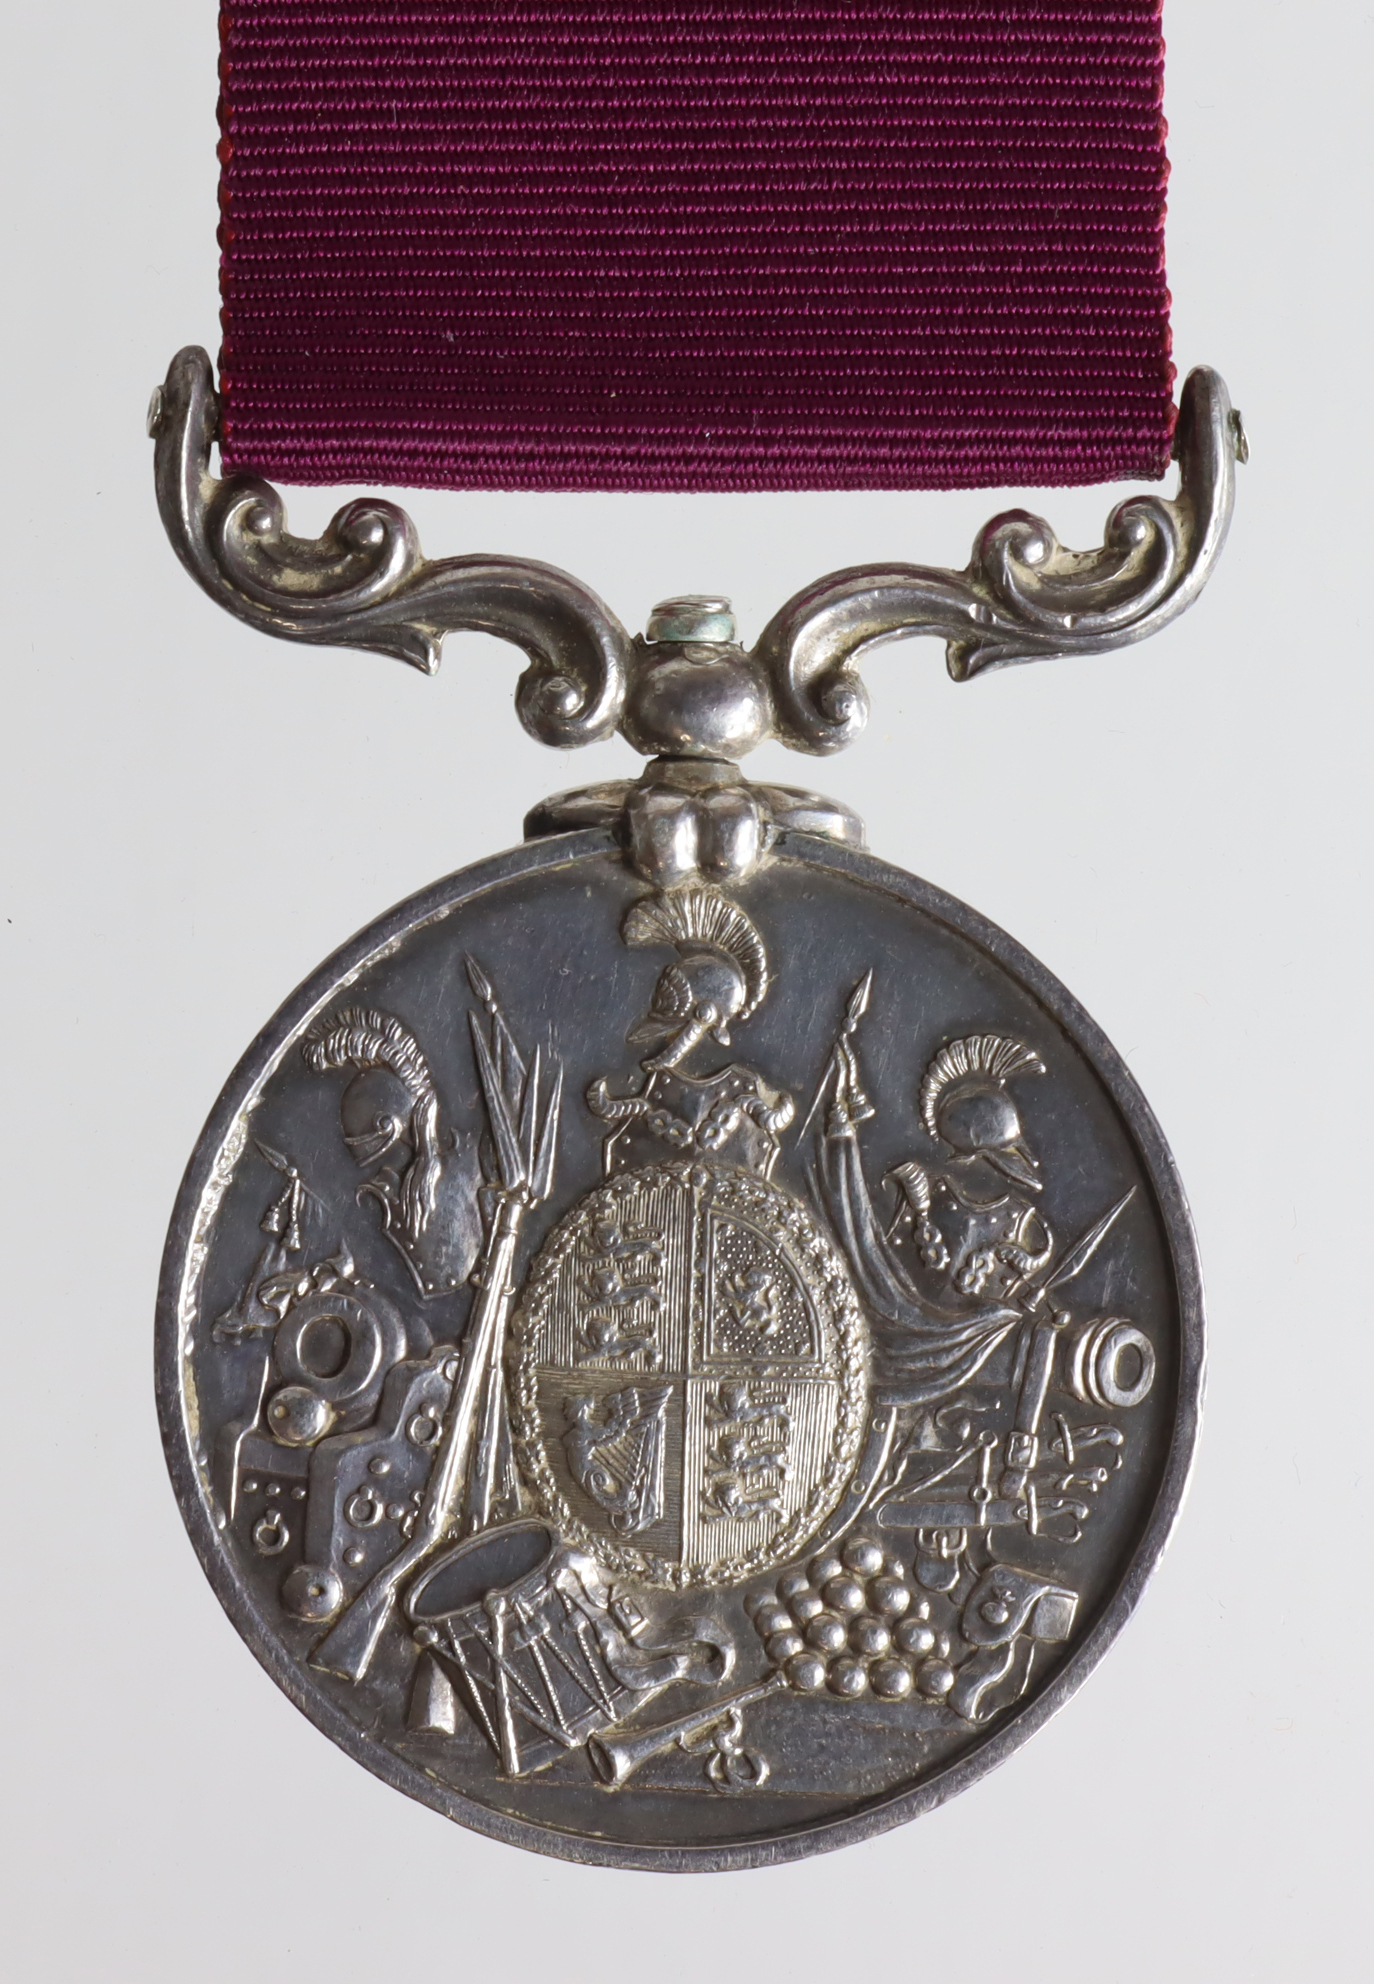 Army LSGC Medal QV named (2826 Robt Smith 42nd Regt). Also entitled to Crimea Medal with 3 bars, and